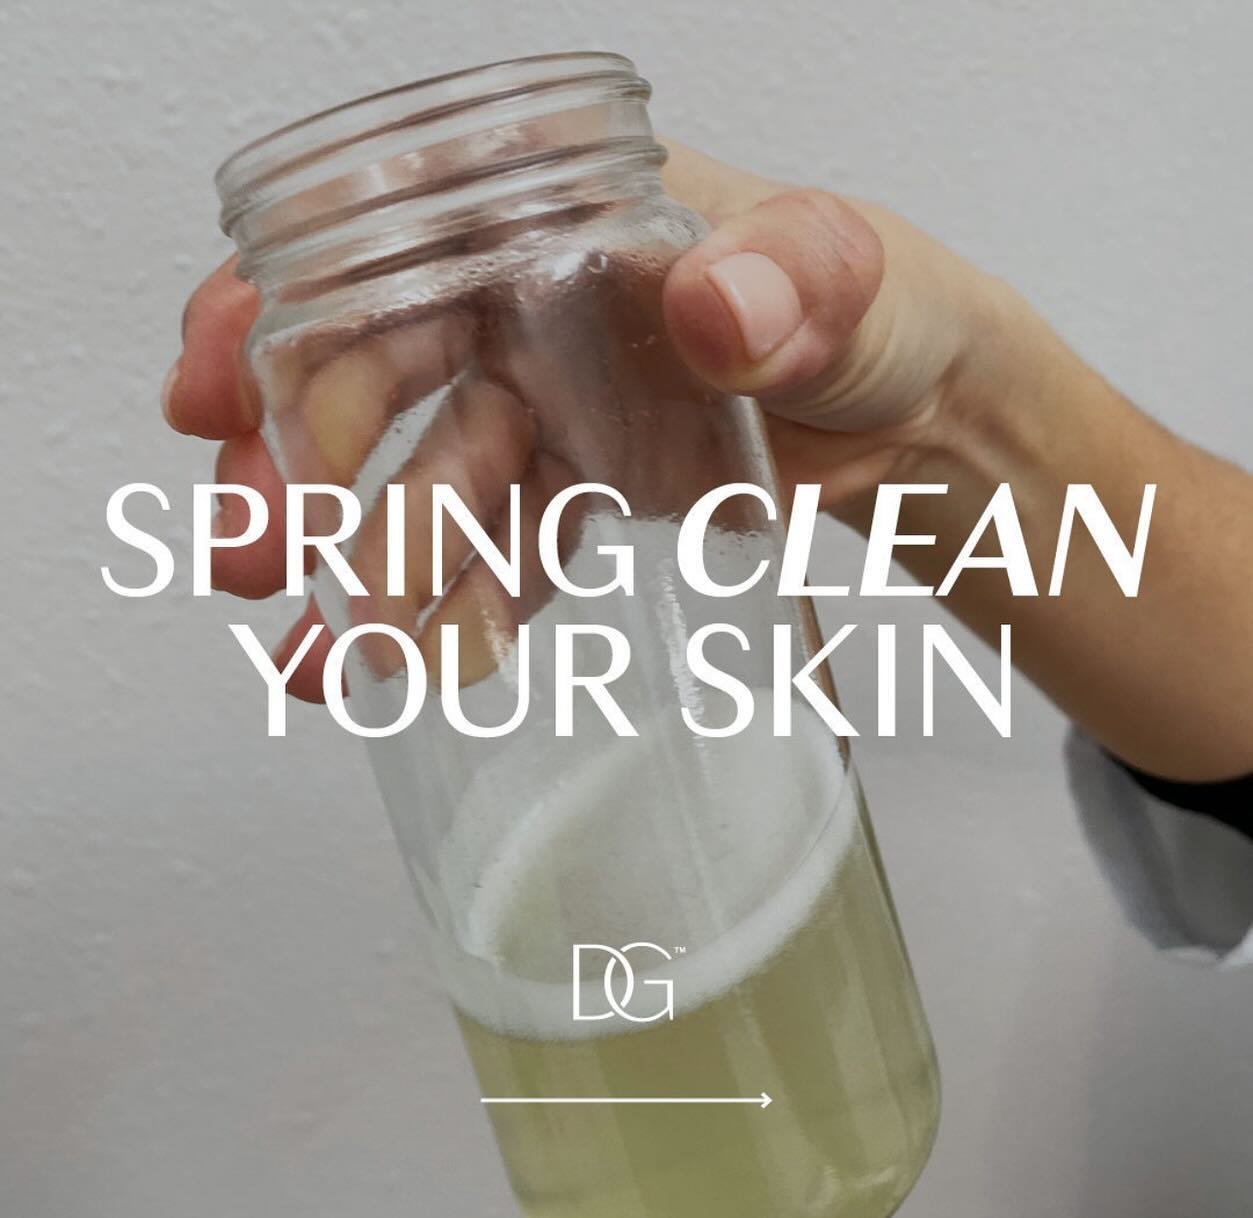 ✨🌻🫧Time to Spring Clean your skin! 

A @diamondglow facial can cleanse, exfoliate and nourish the skin to reveal a more radiant you! 

We love to alternate between diamond glow and hydrafacial every 4-6 weeks for optimal skin health! 

Schedule you